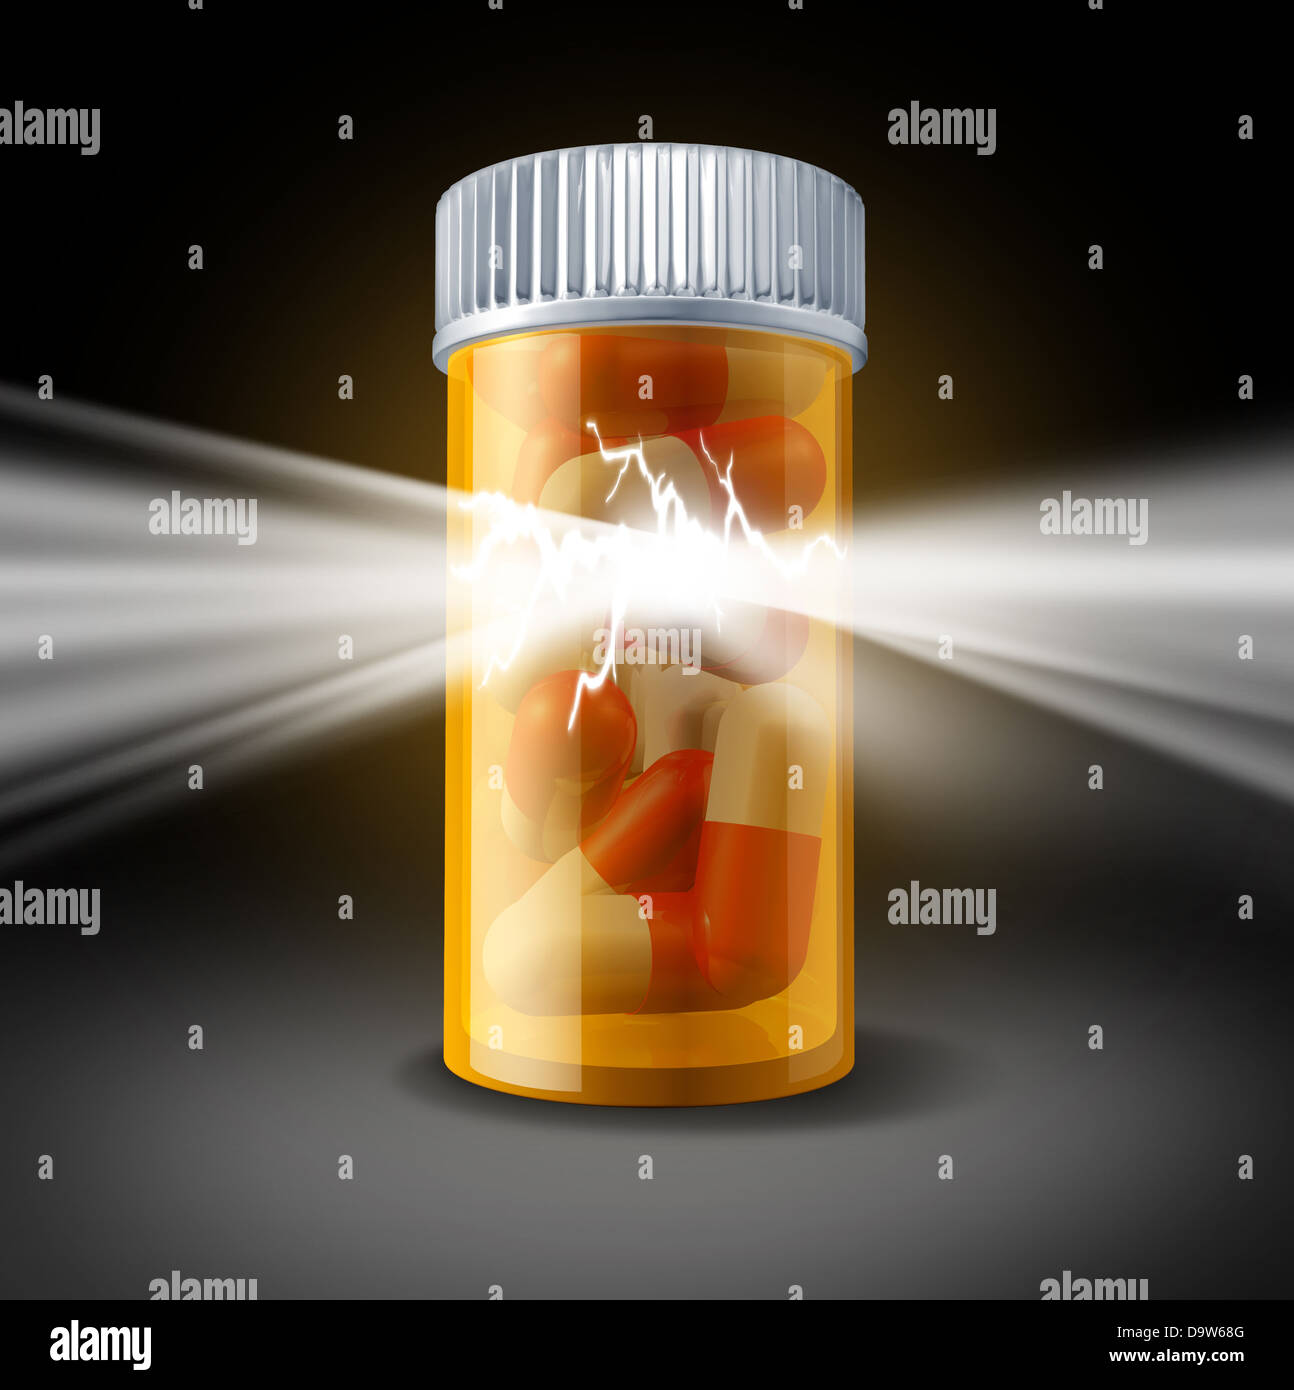 Power of Medicine success and a medication cure health care concept with pharmaceutical research in biotechnology as prescription pill bottle bursting with shinning light as a miracle drug. Stock Photo